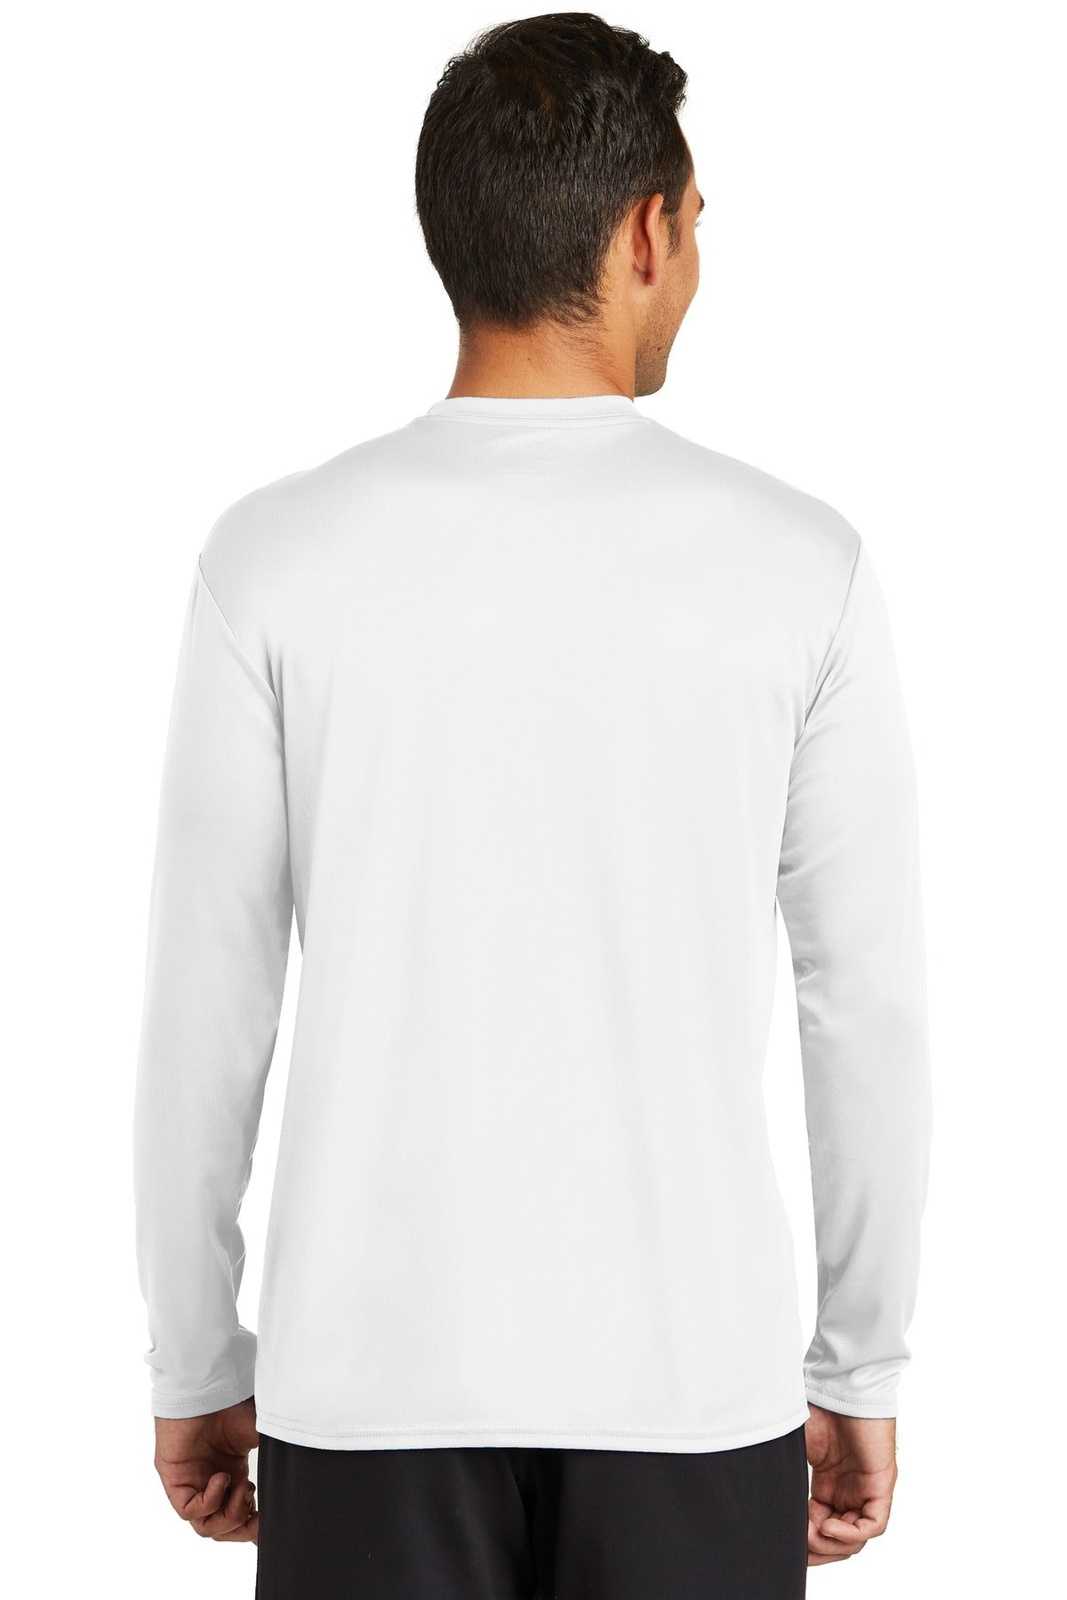 Port &amp; Company PC380LS Long Sleeve Performance Tee - White - HIT a Double - 2